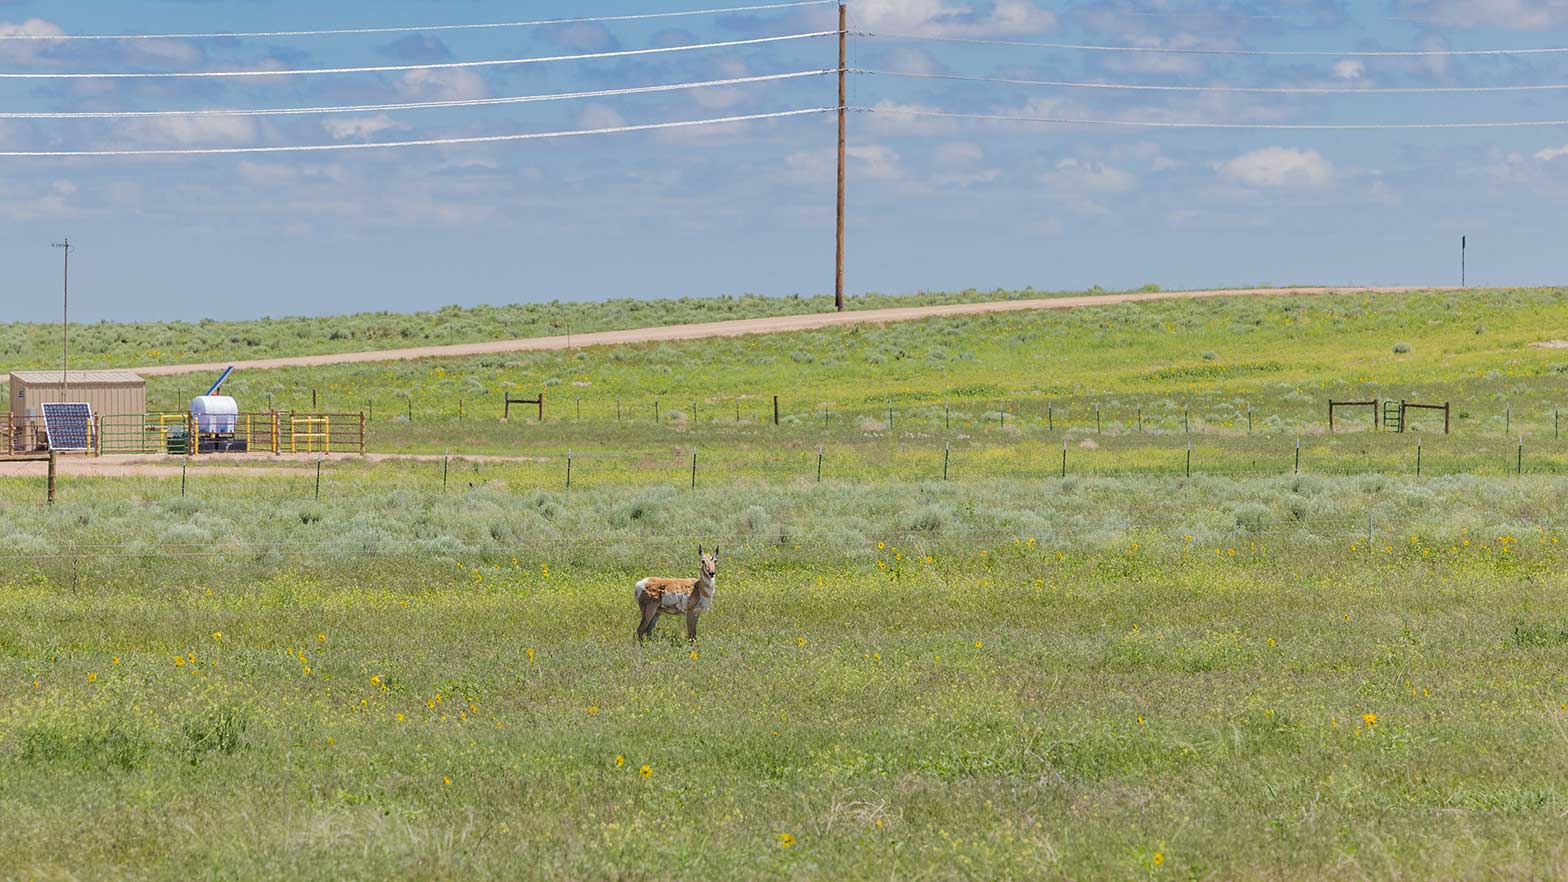 Cows aren’t the only things you’ll find on the ranch, which is also home to antelopes, tortoises, rabbits, horses, chickens and various wild birds.